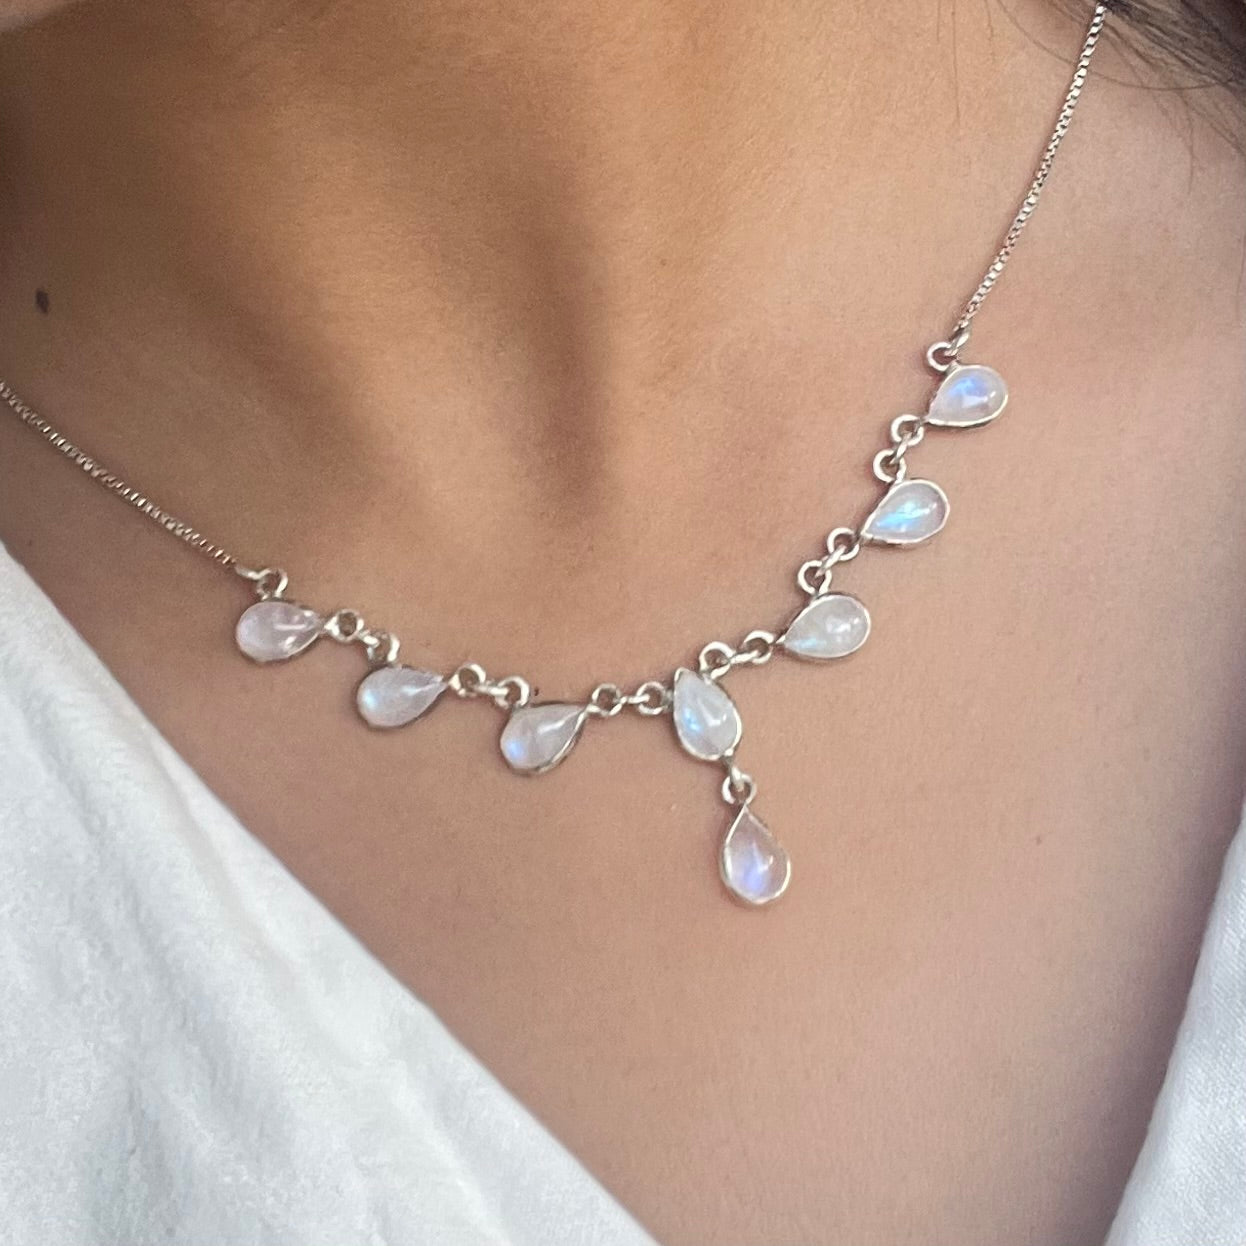 GIVA 925 Sterling Silver Lunar Lustre Moonstone Necklace | Valentines Gifts  for Girlfriend,Pendant to Gift Women & Girls | With Certificate of  Authenticity and 925 Stamp | 6 Months Warranty* : Amazon.in: Jewellery